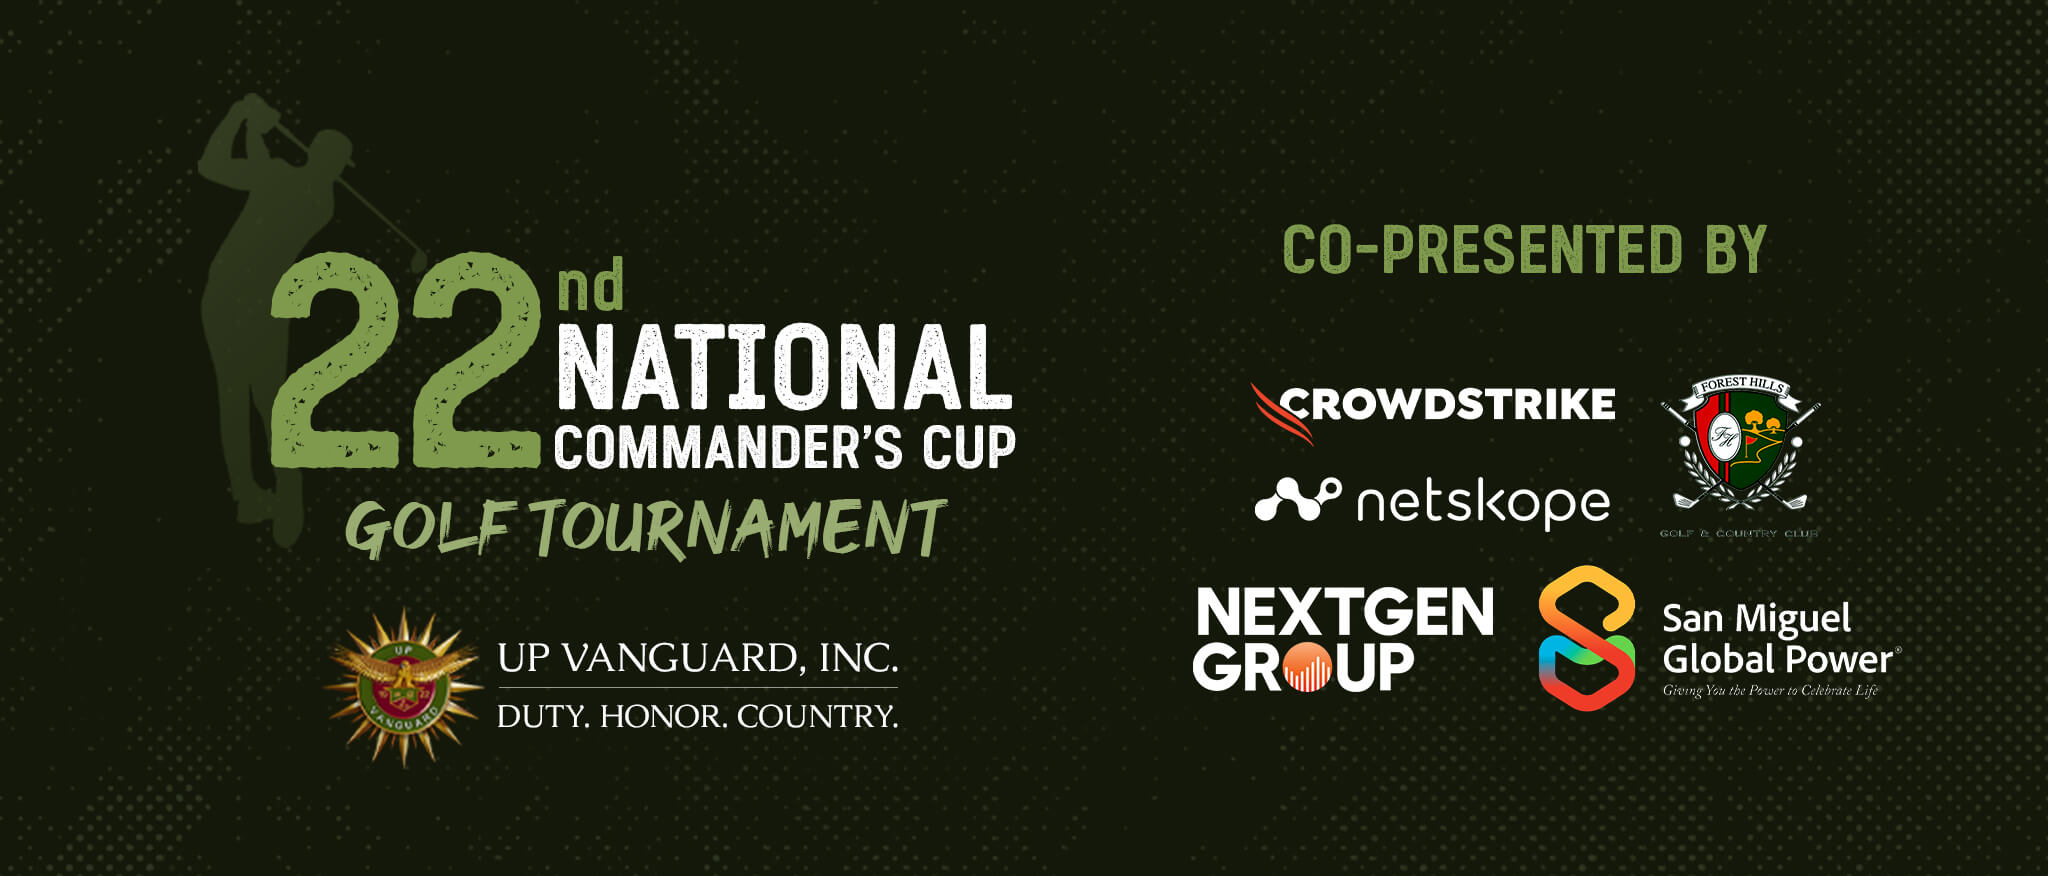 22nd National Commander’s Cup Golf Tournament